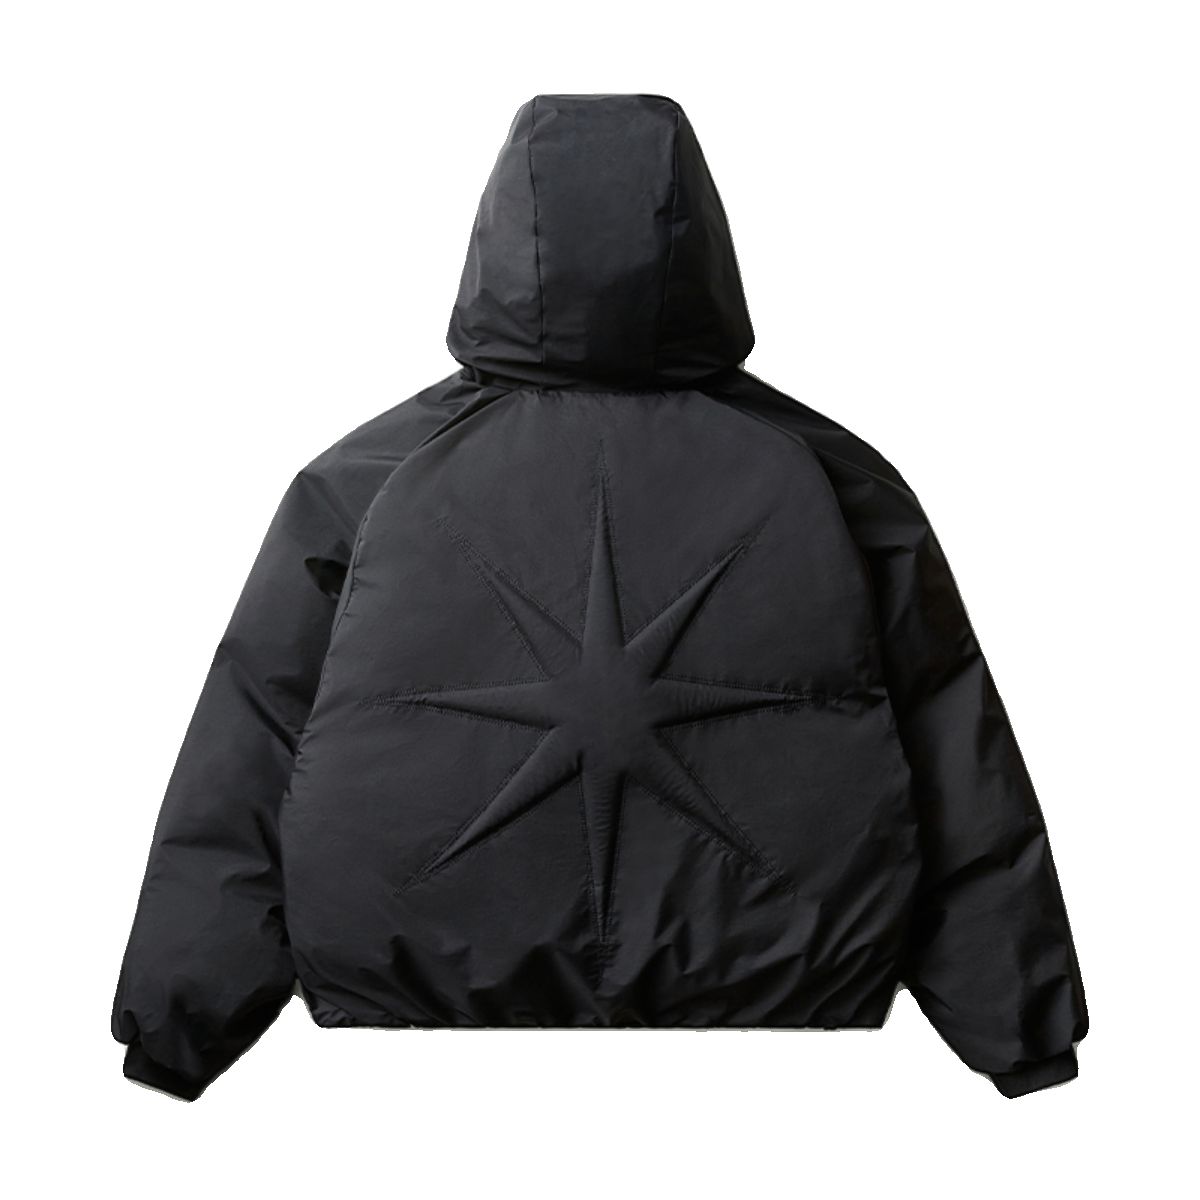 Zippered Hooded Puffer Jacket Korean Street Fashion Jacket By Remedy Shop Online at OH Vault